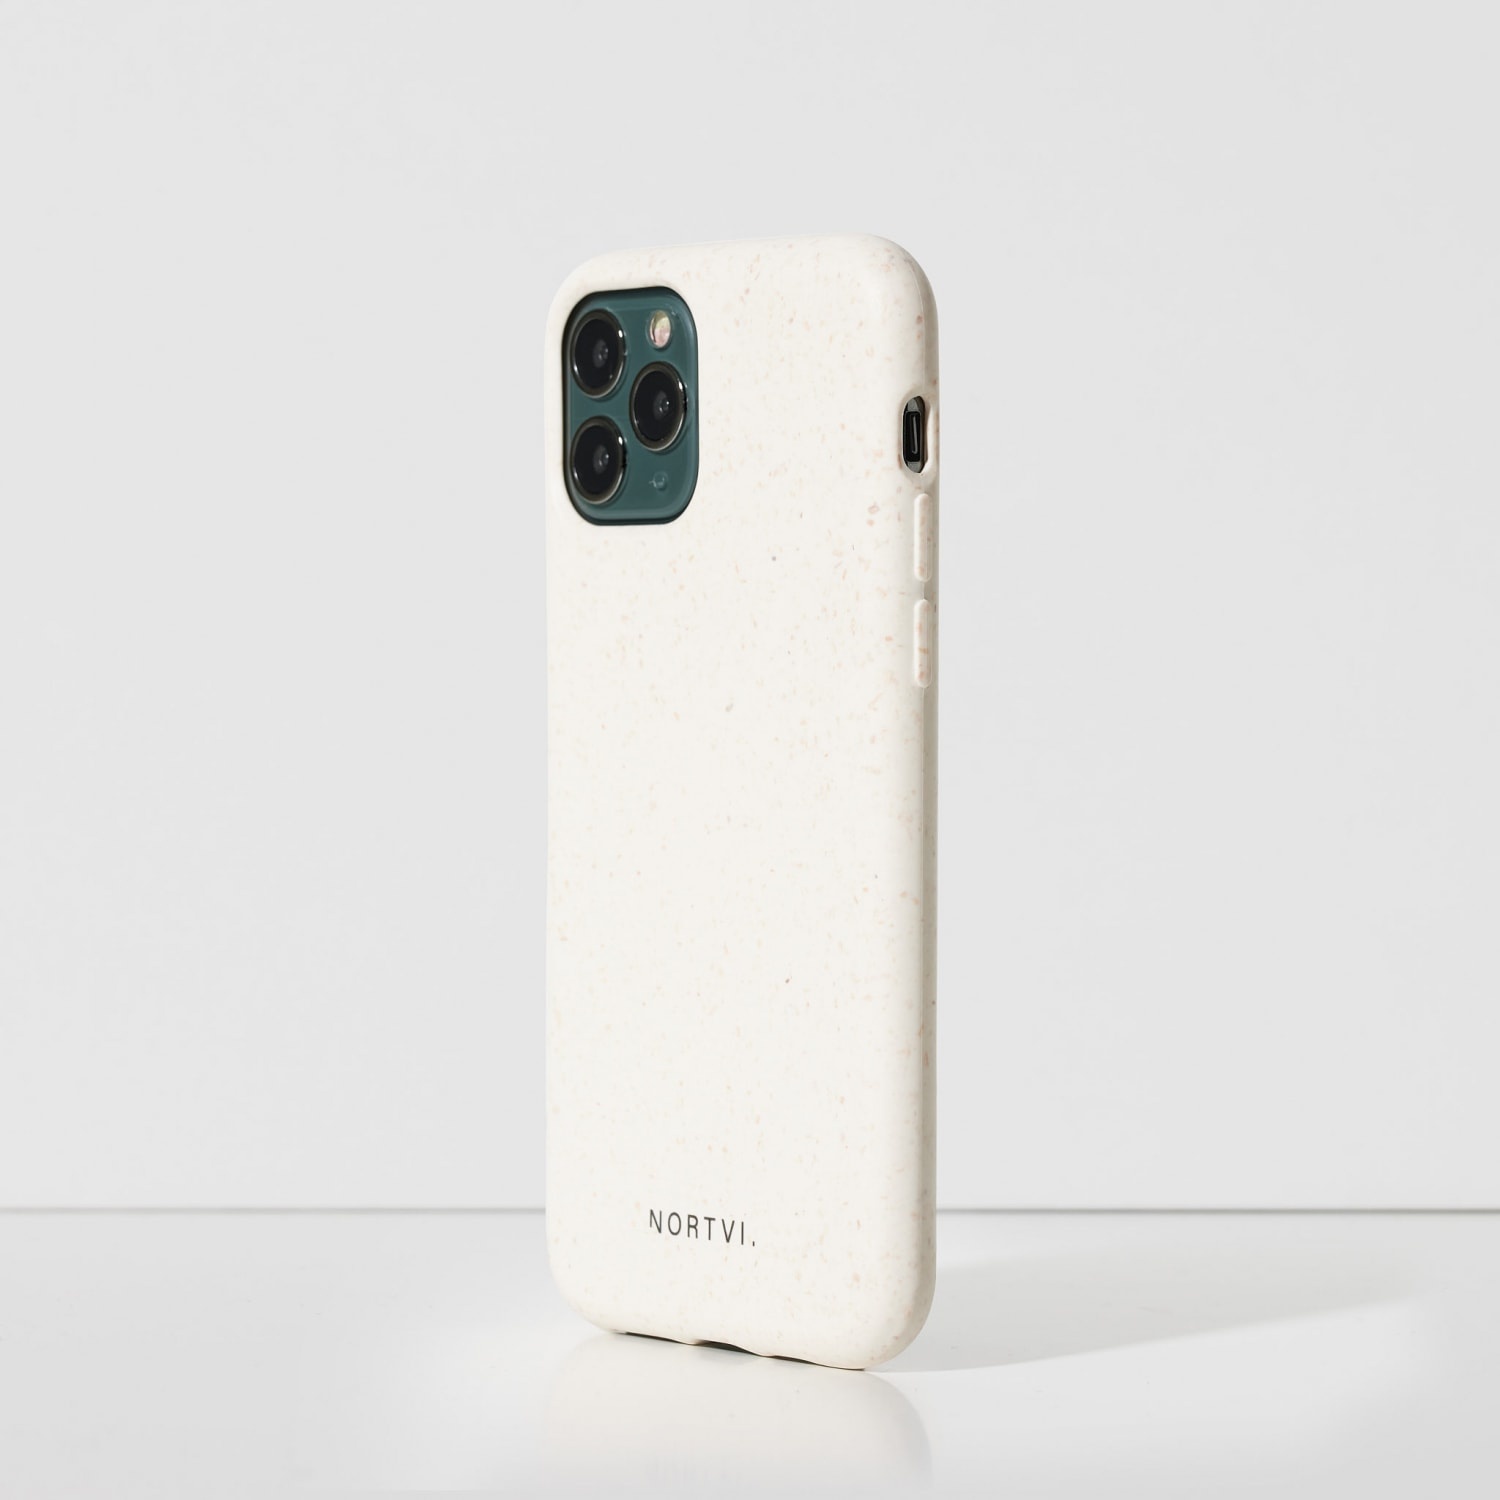 NORTVI white phone case for iPhone 11 Pro case